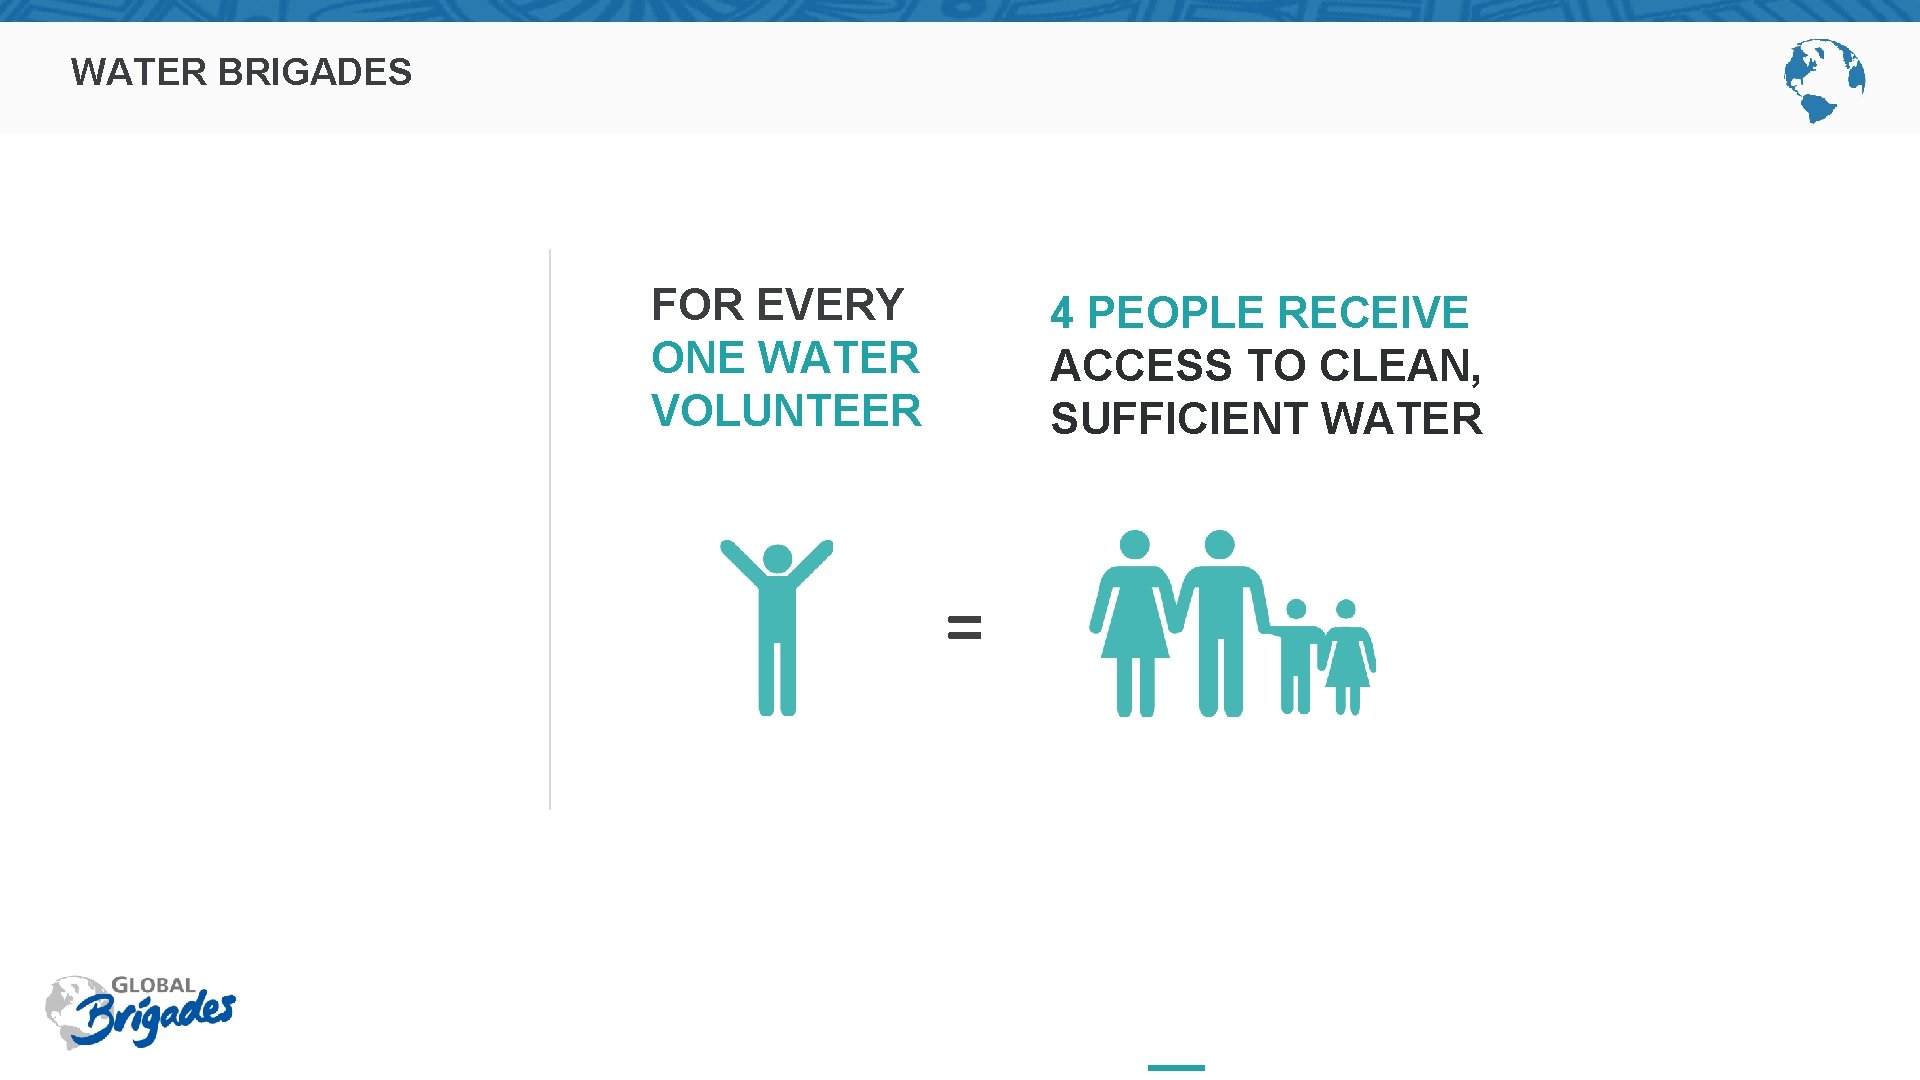 WATER BRIGADES FOR EVERY ONE WATER VOLUNTEER 4 PEOPLE RECEIVE ACCESS TO CLEAN, SUFFICIENT